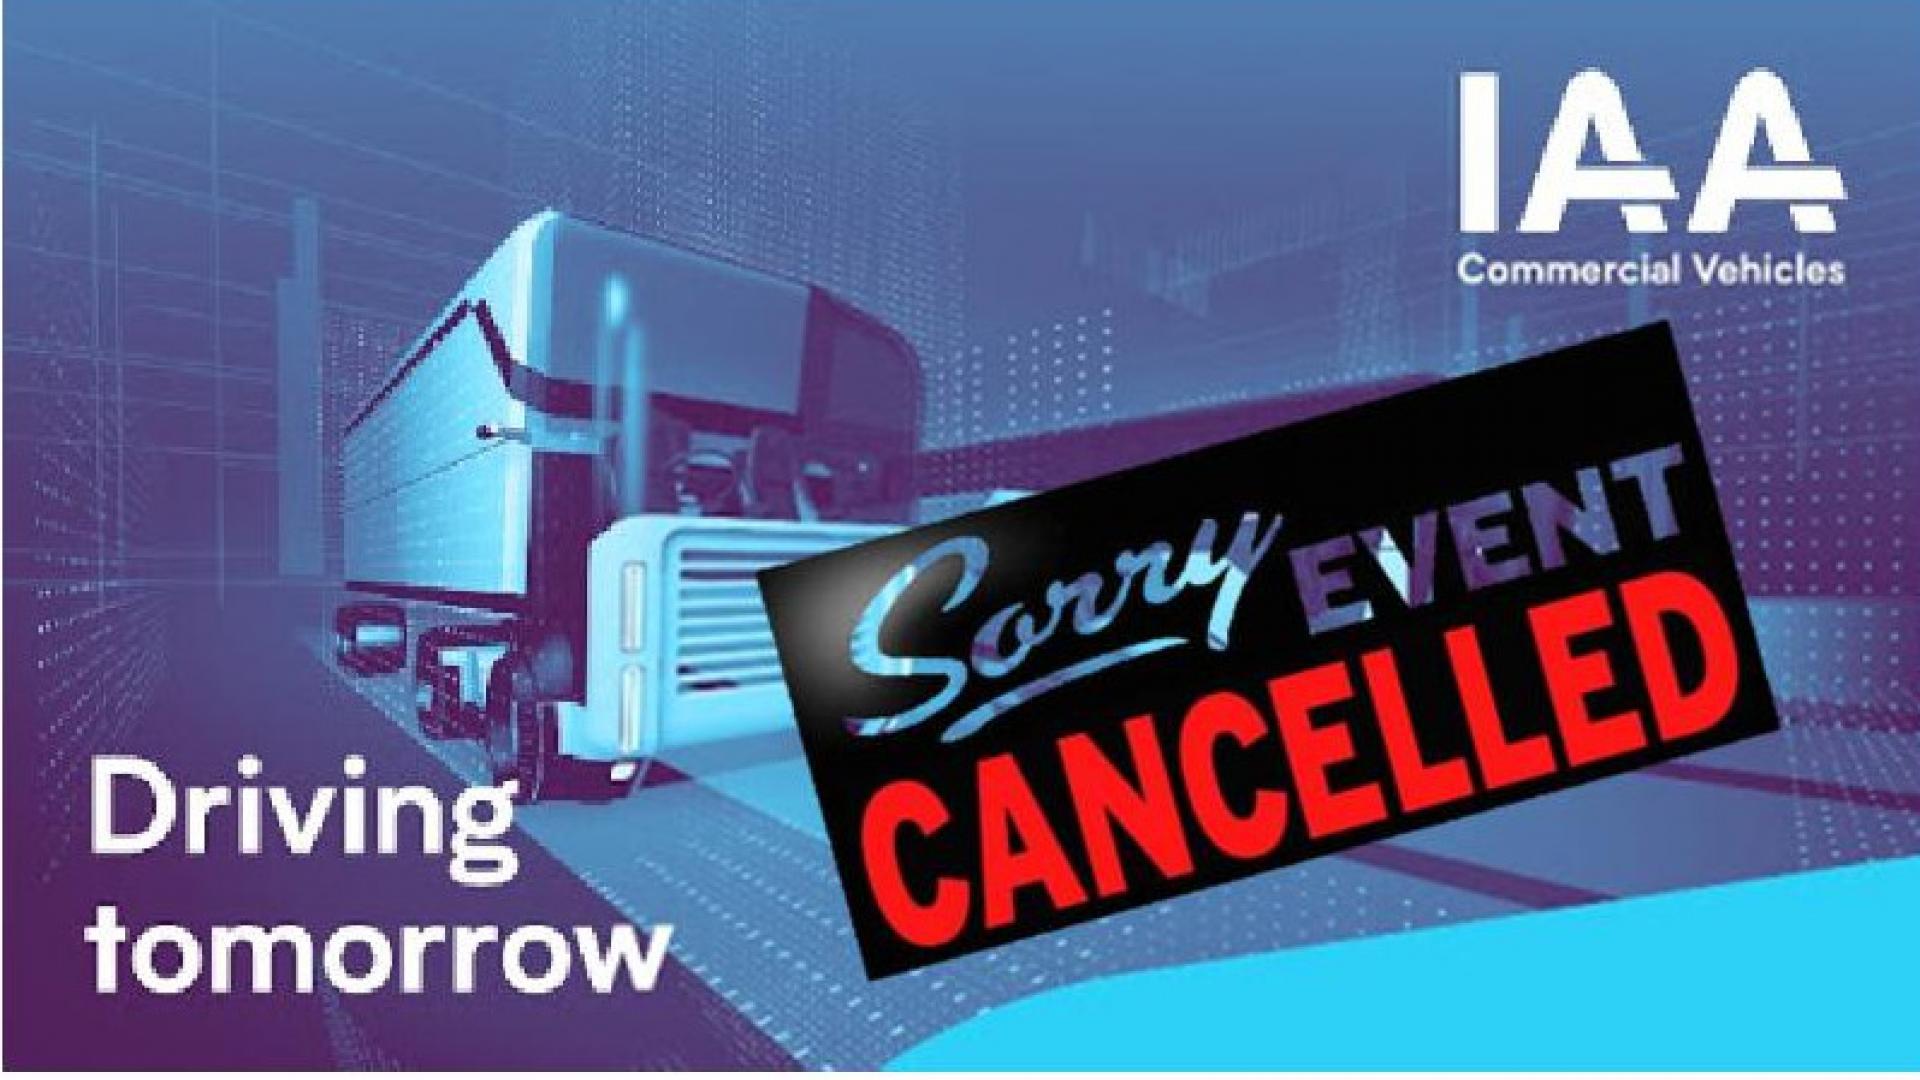 No IAA Commercial Vehicles show in Hanover this year!